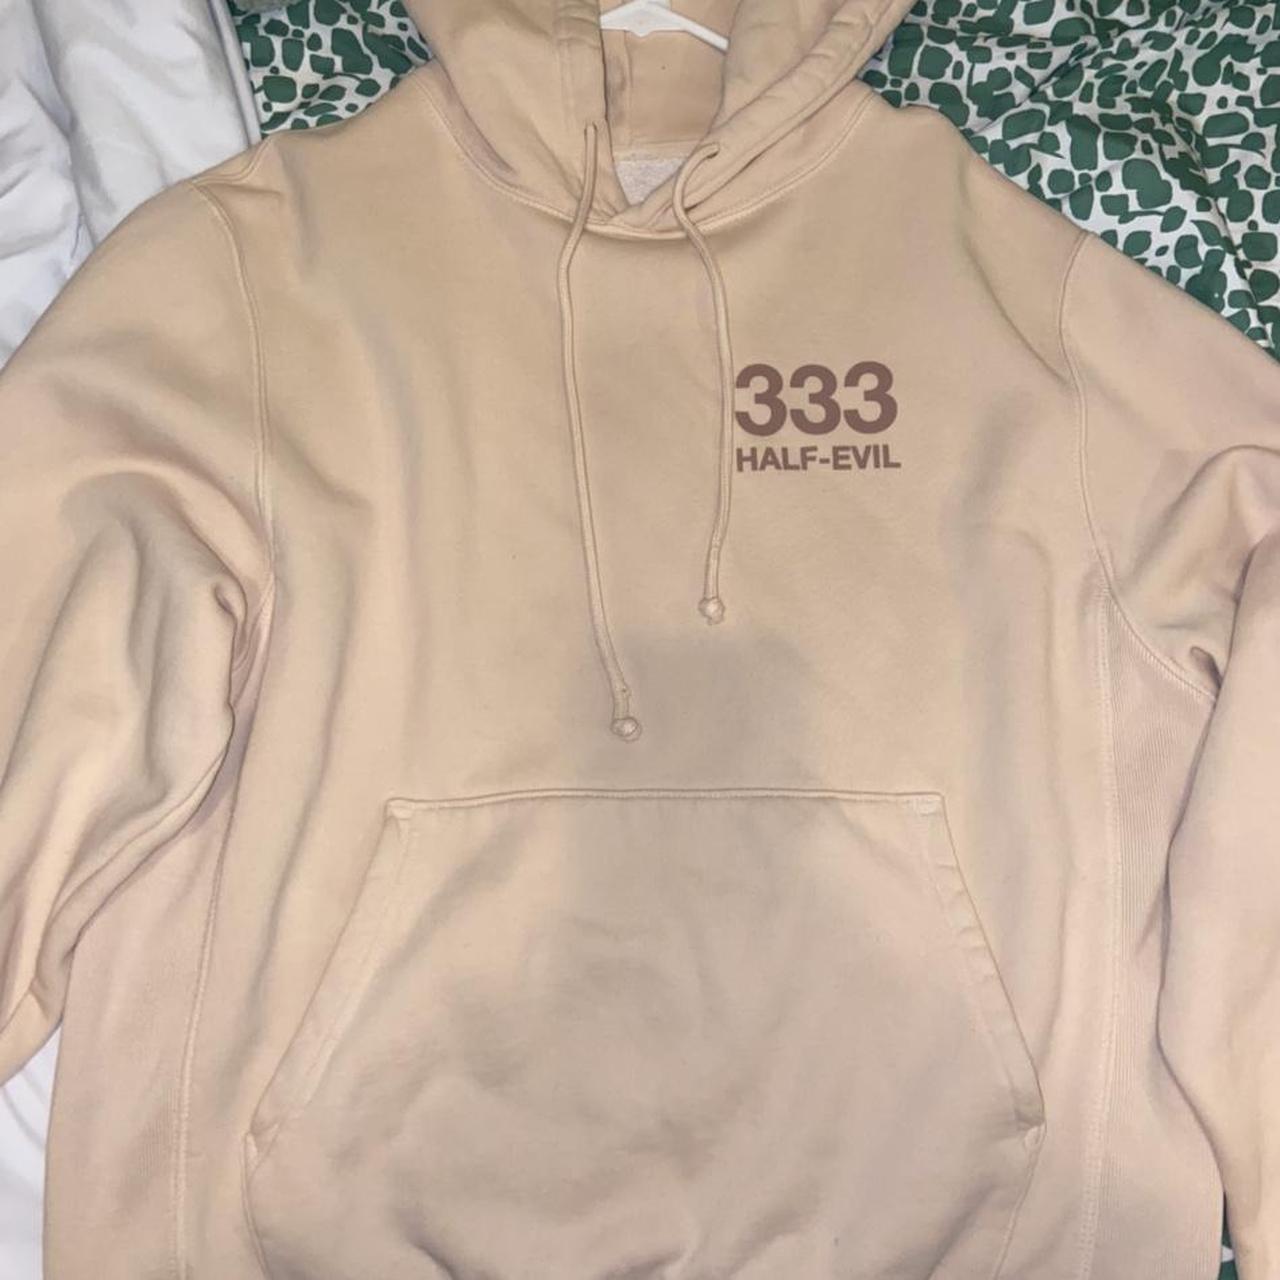 Product Image 1 - Tan half evil hoodie. Only